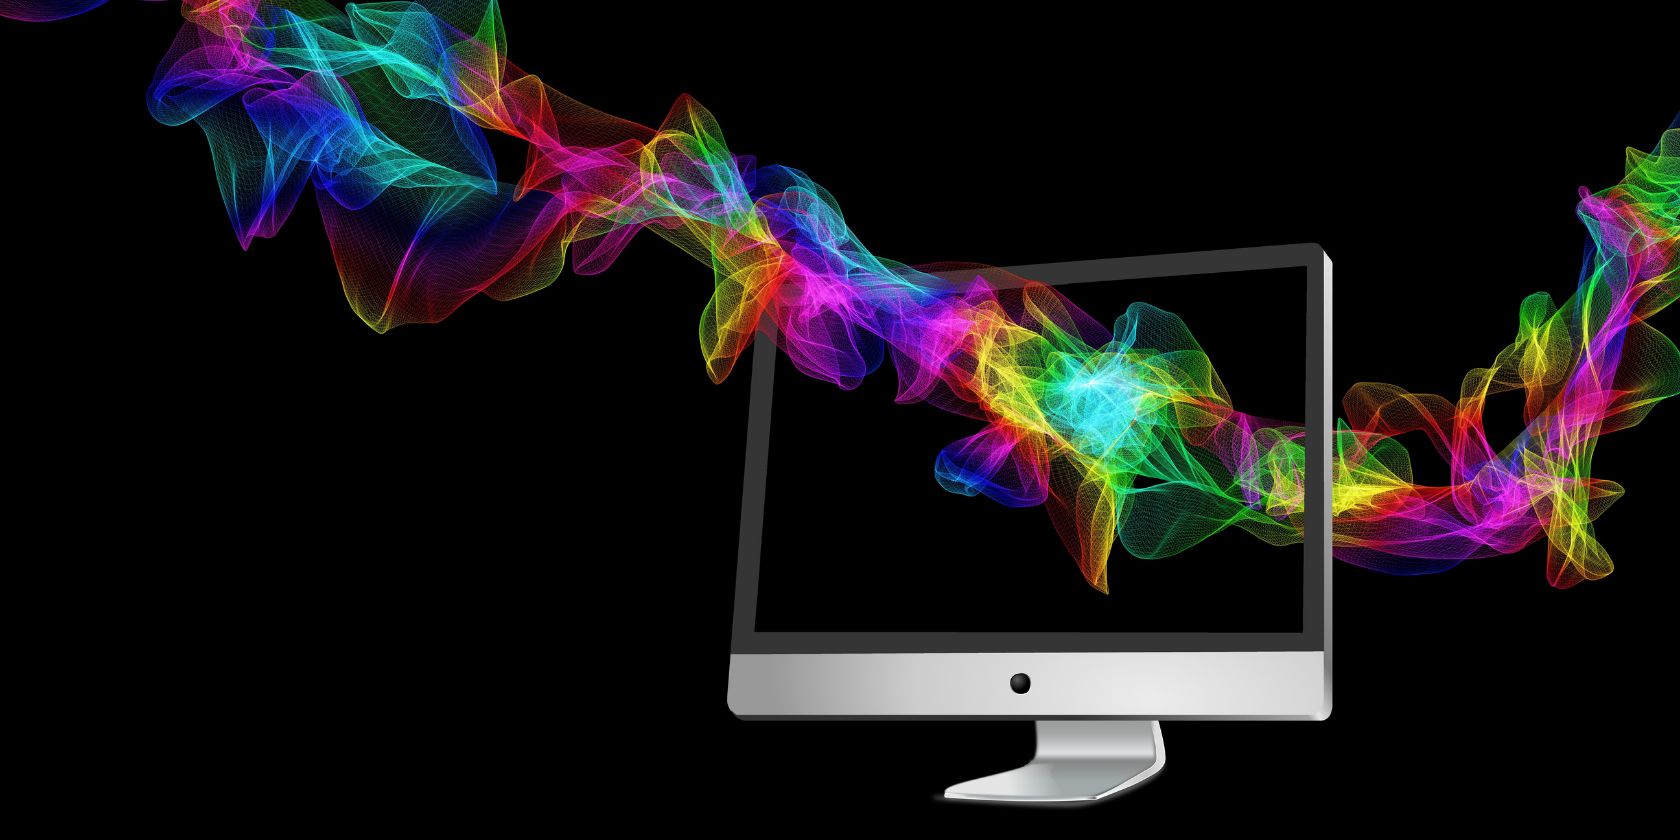 4 Simple Ways to Calibrate Your Monitor for Accurate Colors